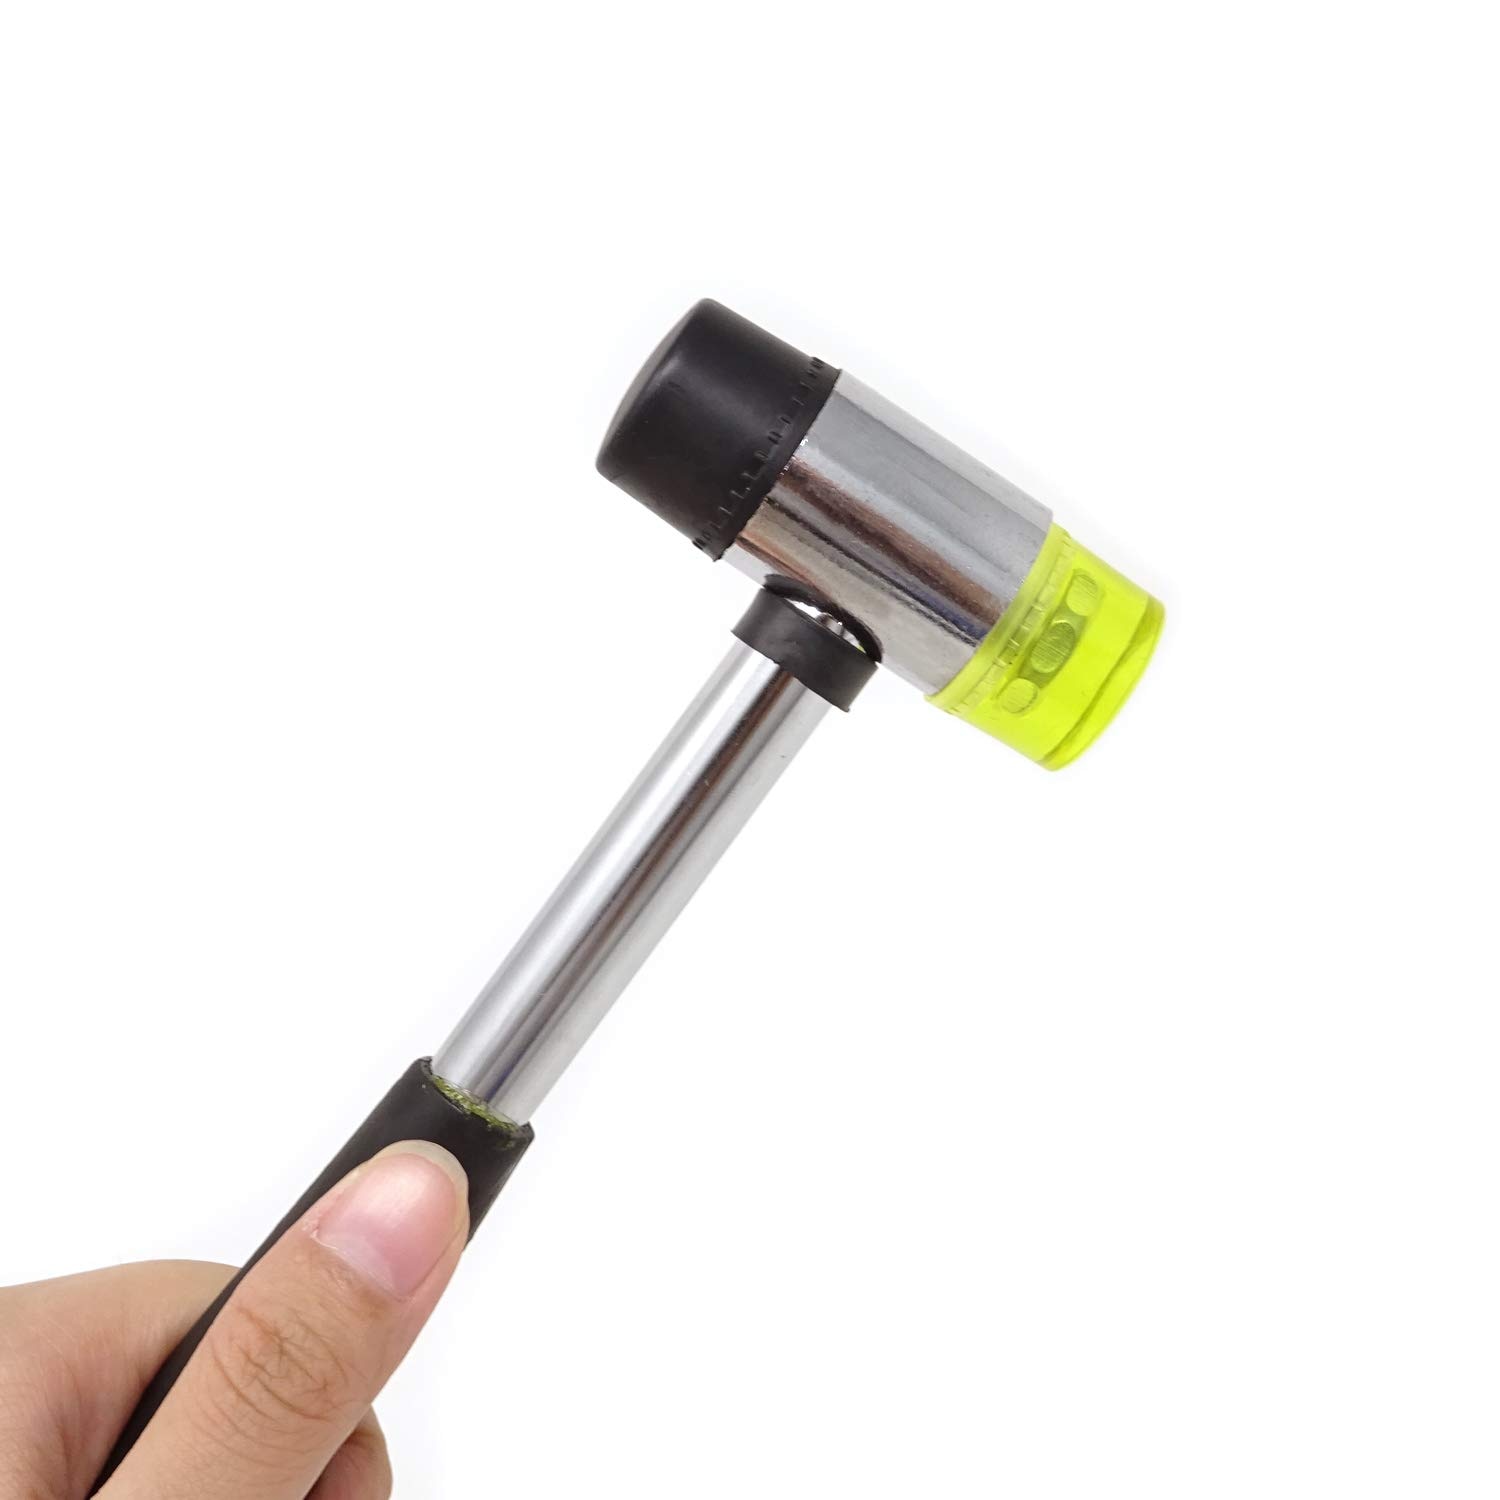 25mm 35mm 40mm Double Faced Head Larger Small Rubber Hammer For Flooring Ceramic Tile Window Glazing Mallet Nonslip Grip Tool